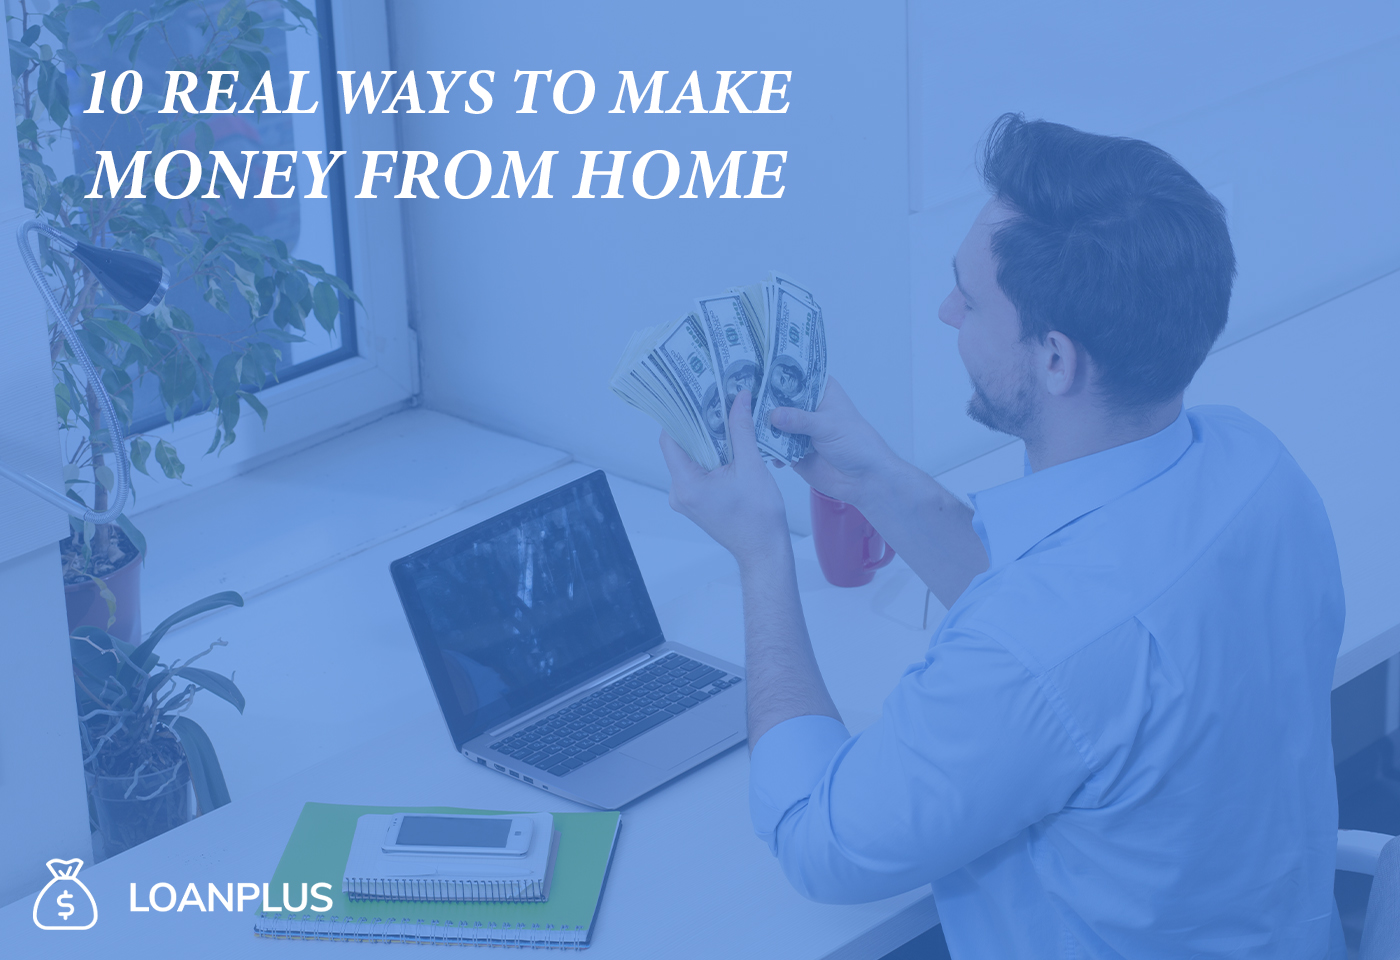 10 Real Ways to Make Money from Home